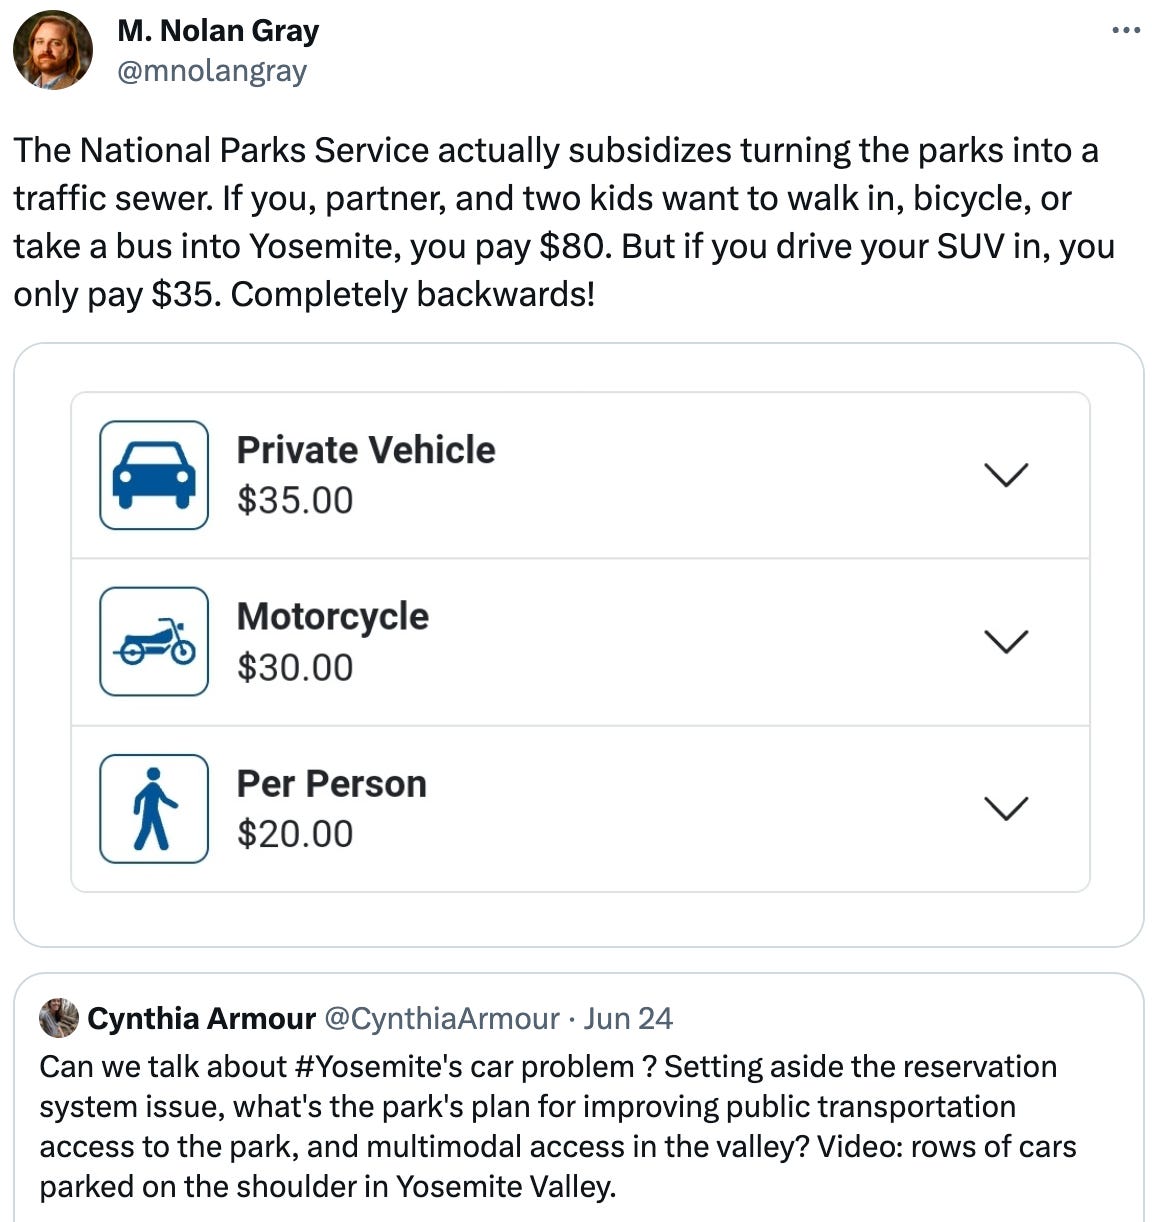  M. Nolan Gray @mnolangray The National Parks Service actually subsidizes turning the parks into a traffic sewer. If you, partner, and two kids want to walk in, bicycle, or take a bus into Yosemite, you pay $80. But if you drive your SUV in, you only pay $35. Completely backwards! Quote Tweet Cynthia Armour @CynthiaArmour · Jun 24 Can we talk about #Yosemite's car problem ? Setting aside the reservation system issue, what's the park's plan for improving public transportation access to the park, and multimodal access in the valley? Video: rows of cars parked on the shoulder in Yosemite Valley.